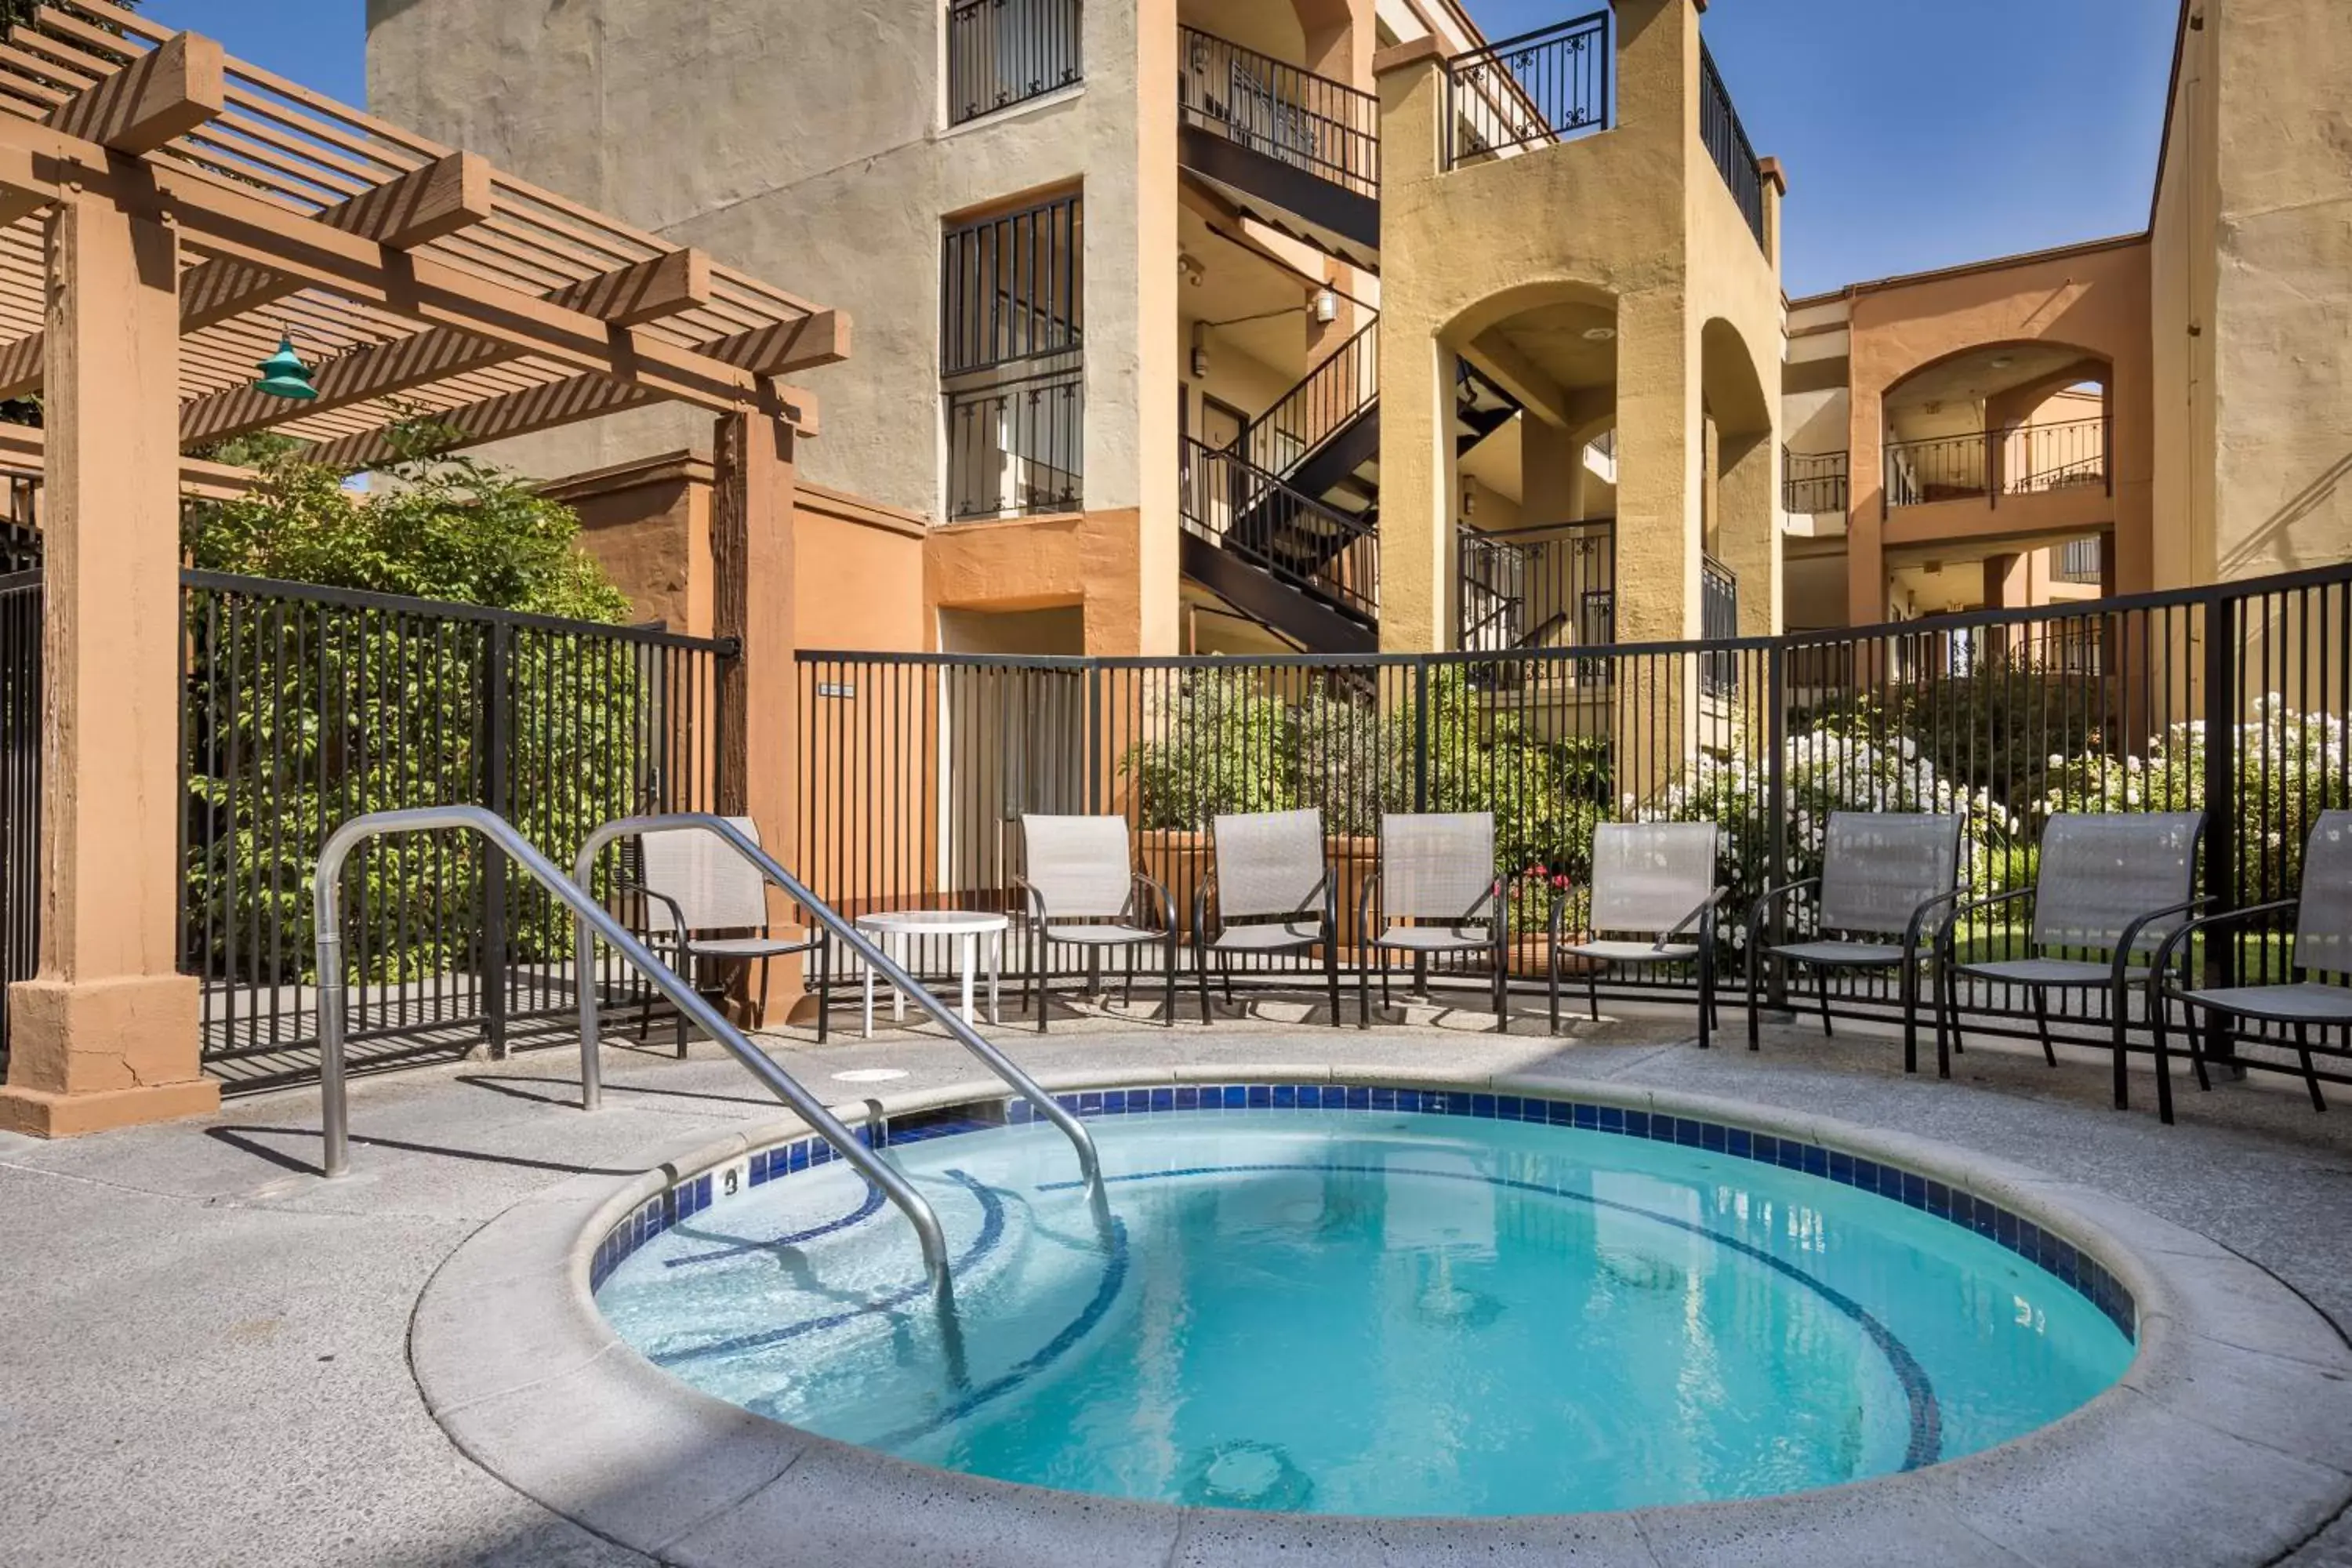 Swimming Pool in MainStay Suites John Wayne Airport, a Choice Hotel